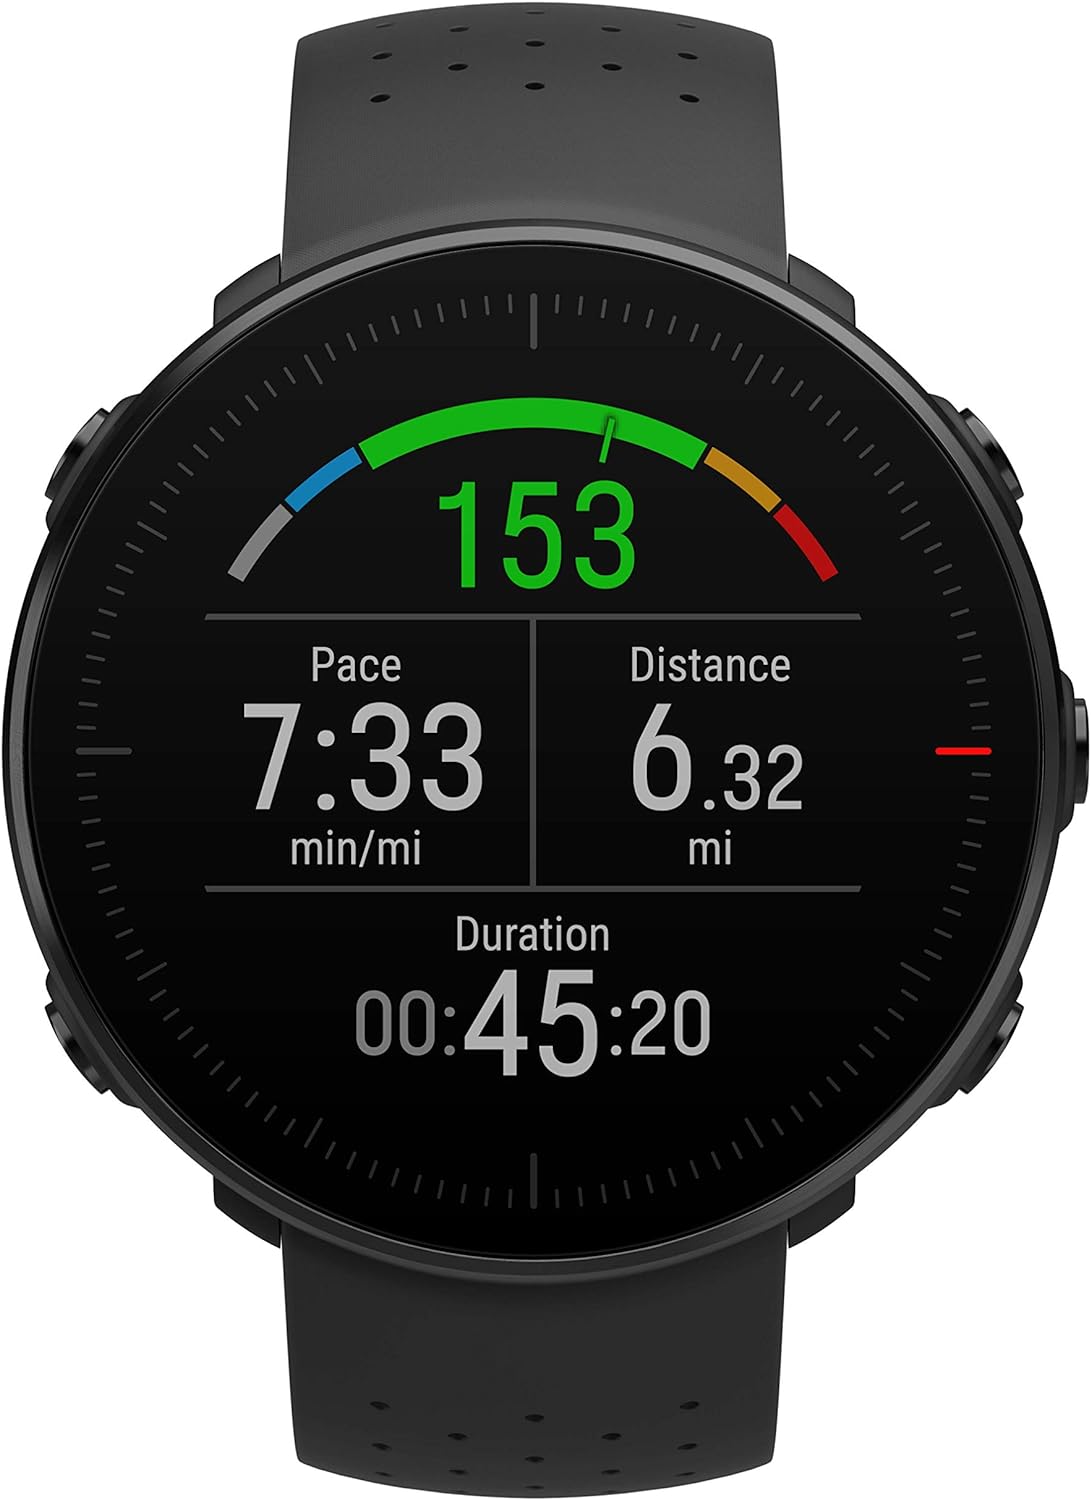 Polar Vantage M Review: The Ultimate Fitness Watch for Active Enthusiasts